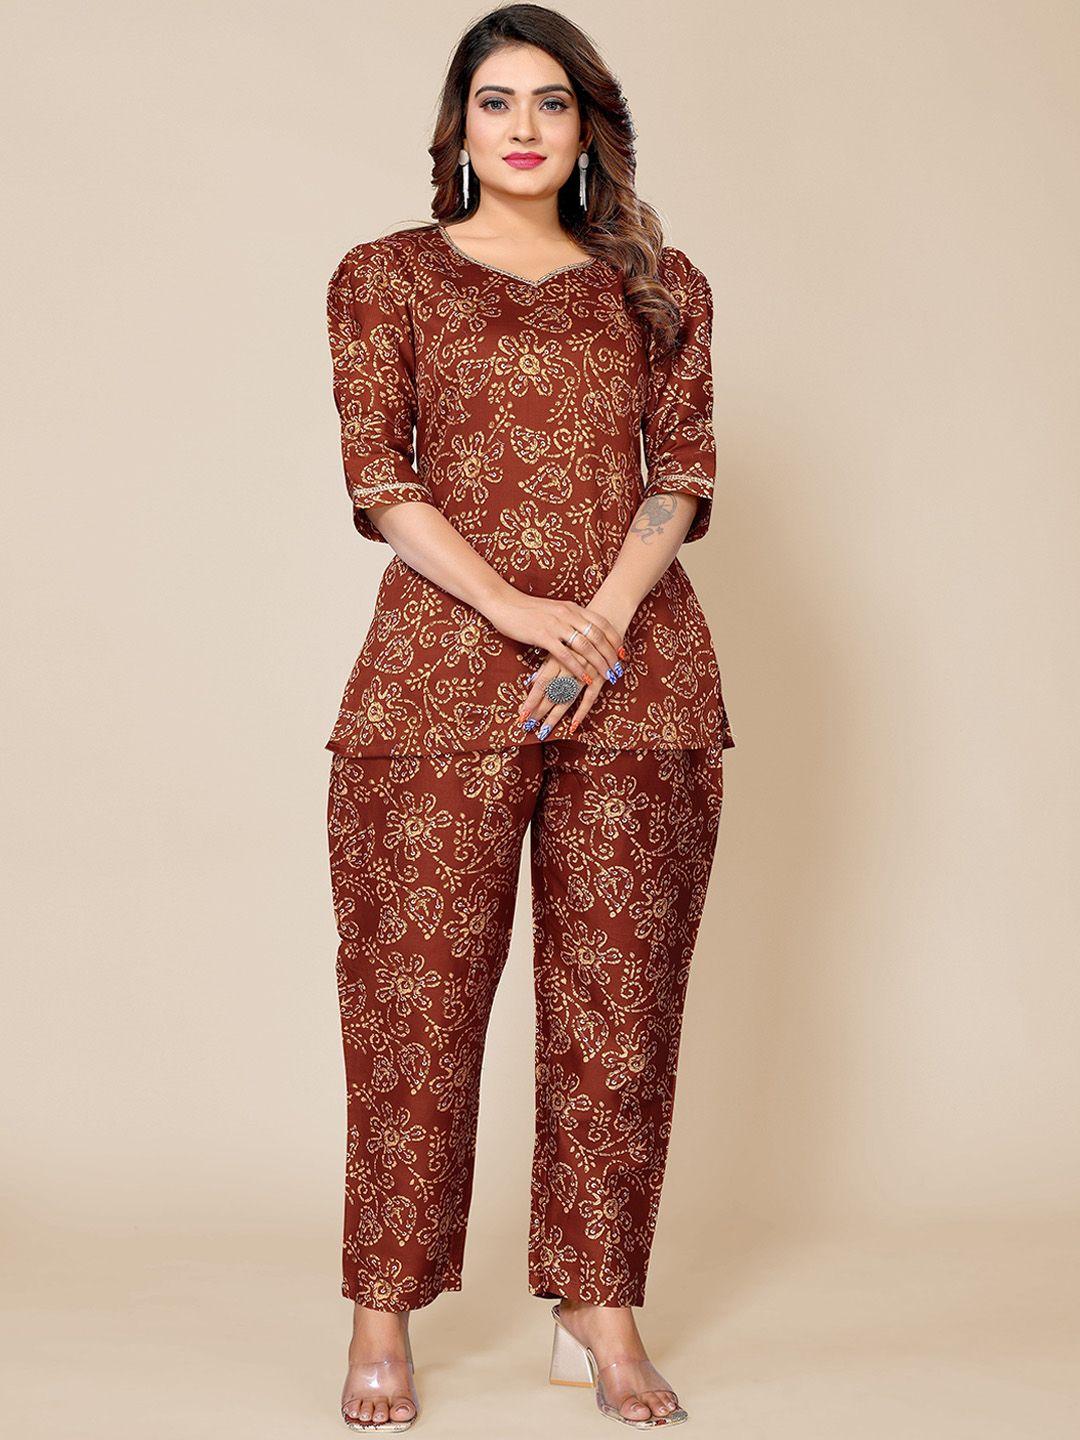 krimmple floral printed sweetheart neck top with trousers pure cotton co-ords